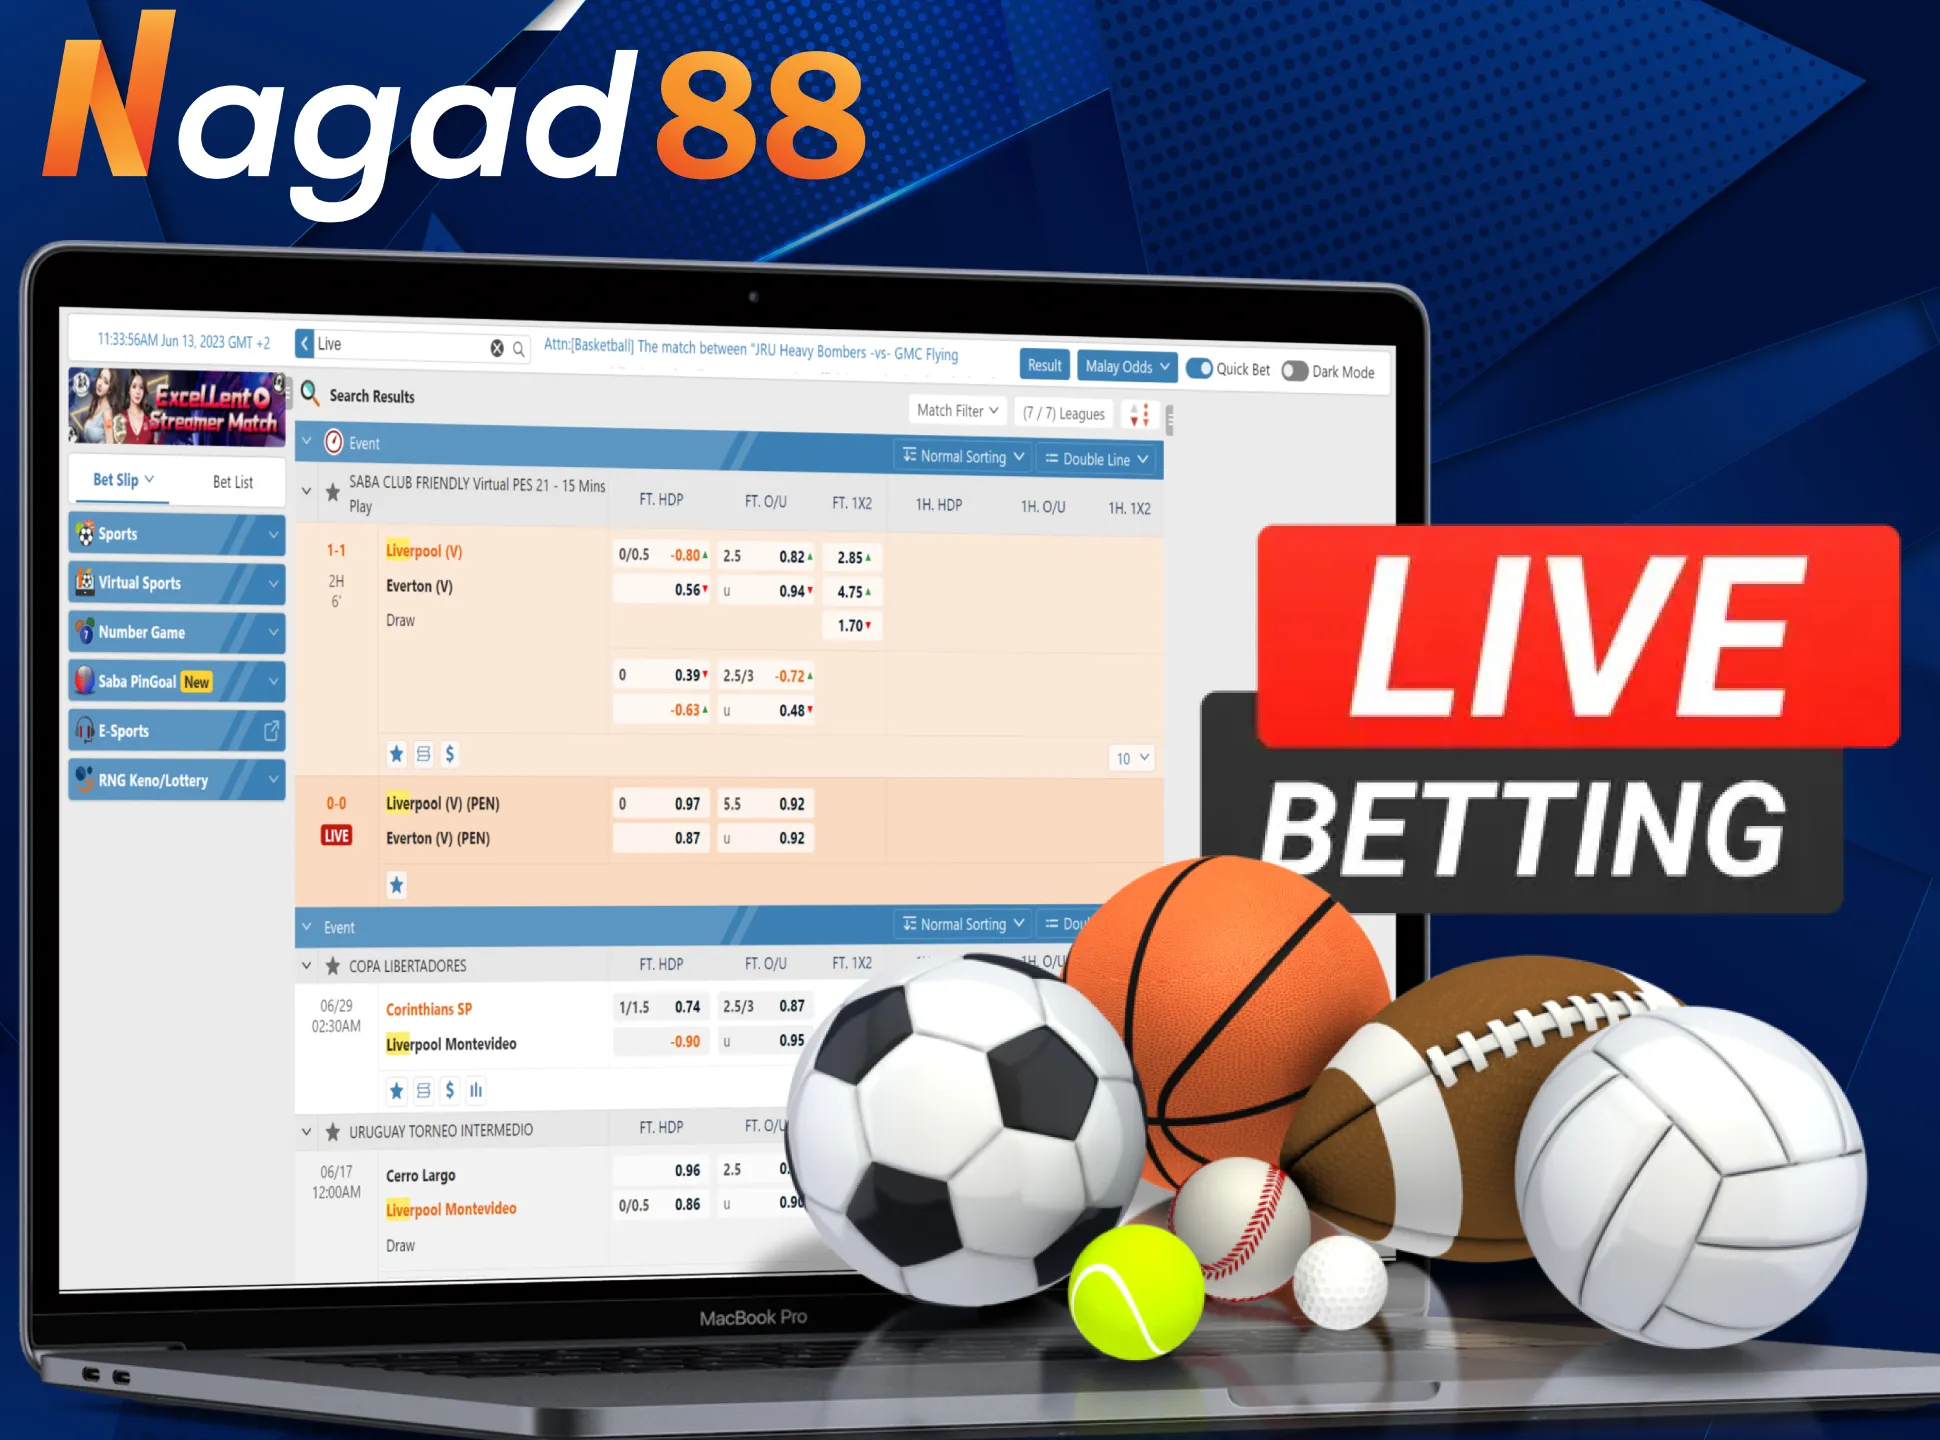 With Nagad88 you can place bets while streaming a match.